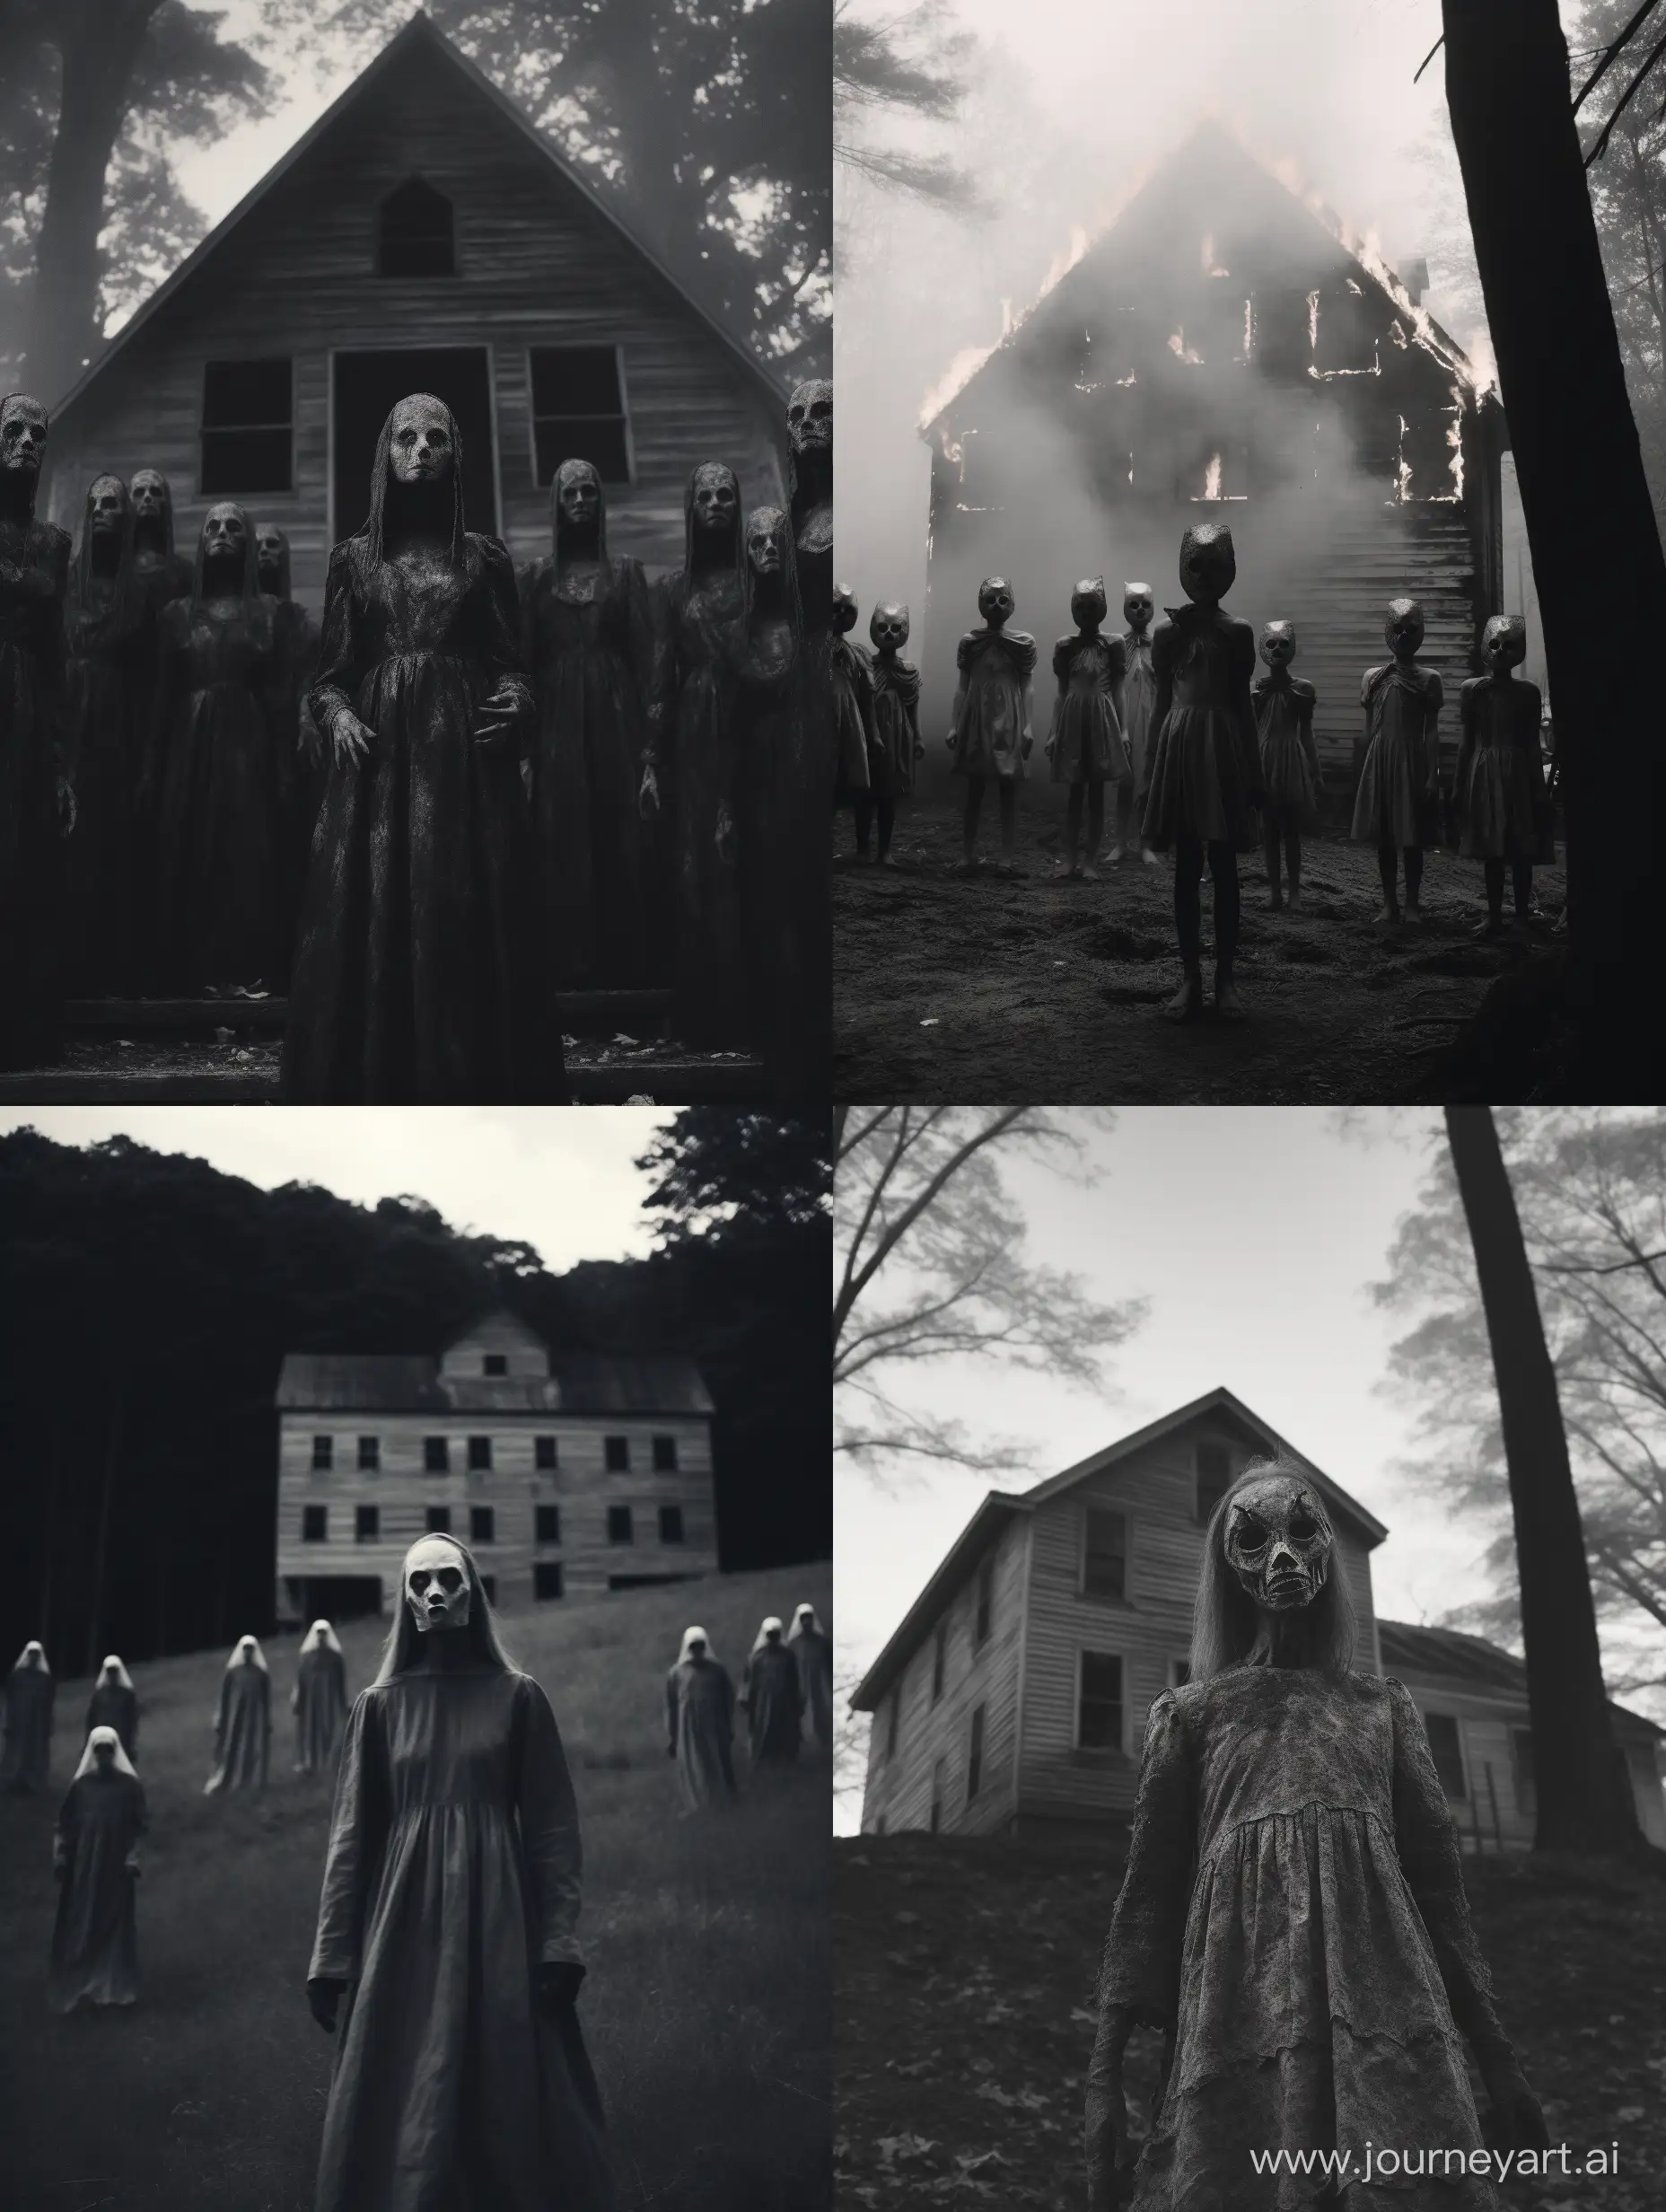 Salem-Witch-Trials-Reimagined-Haunting-Grayscale-Pagan-Horror